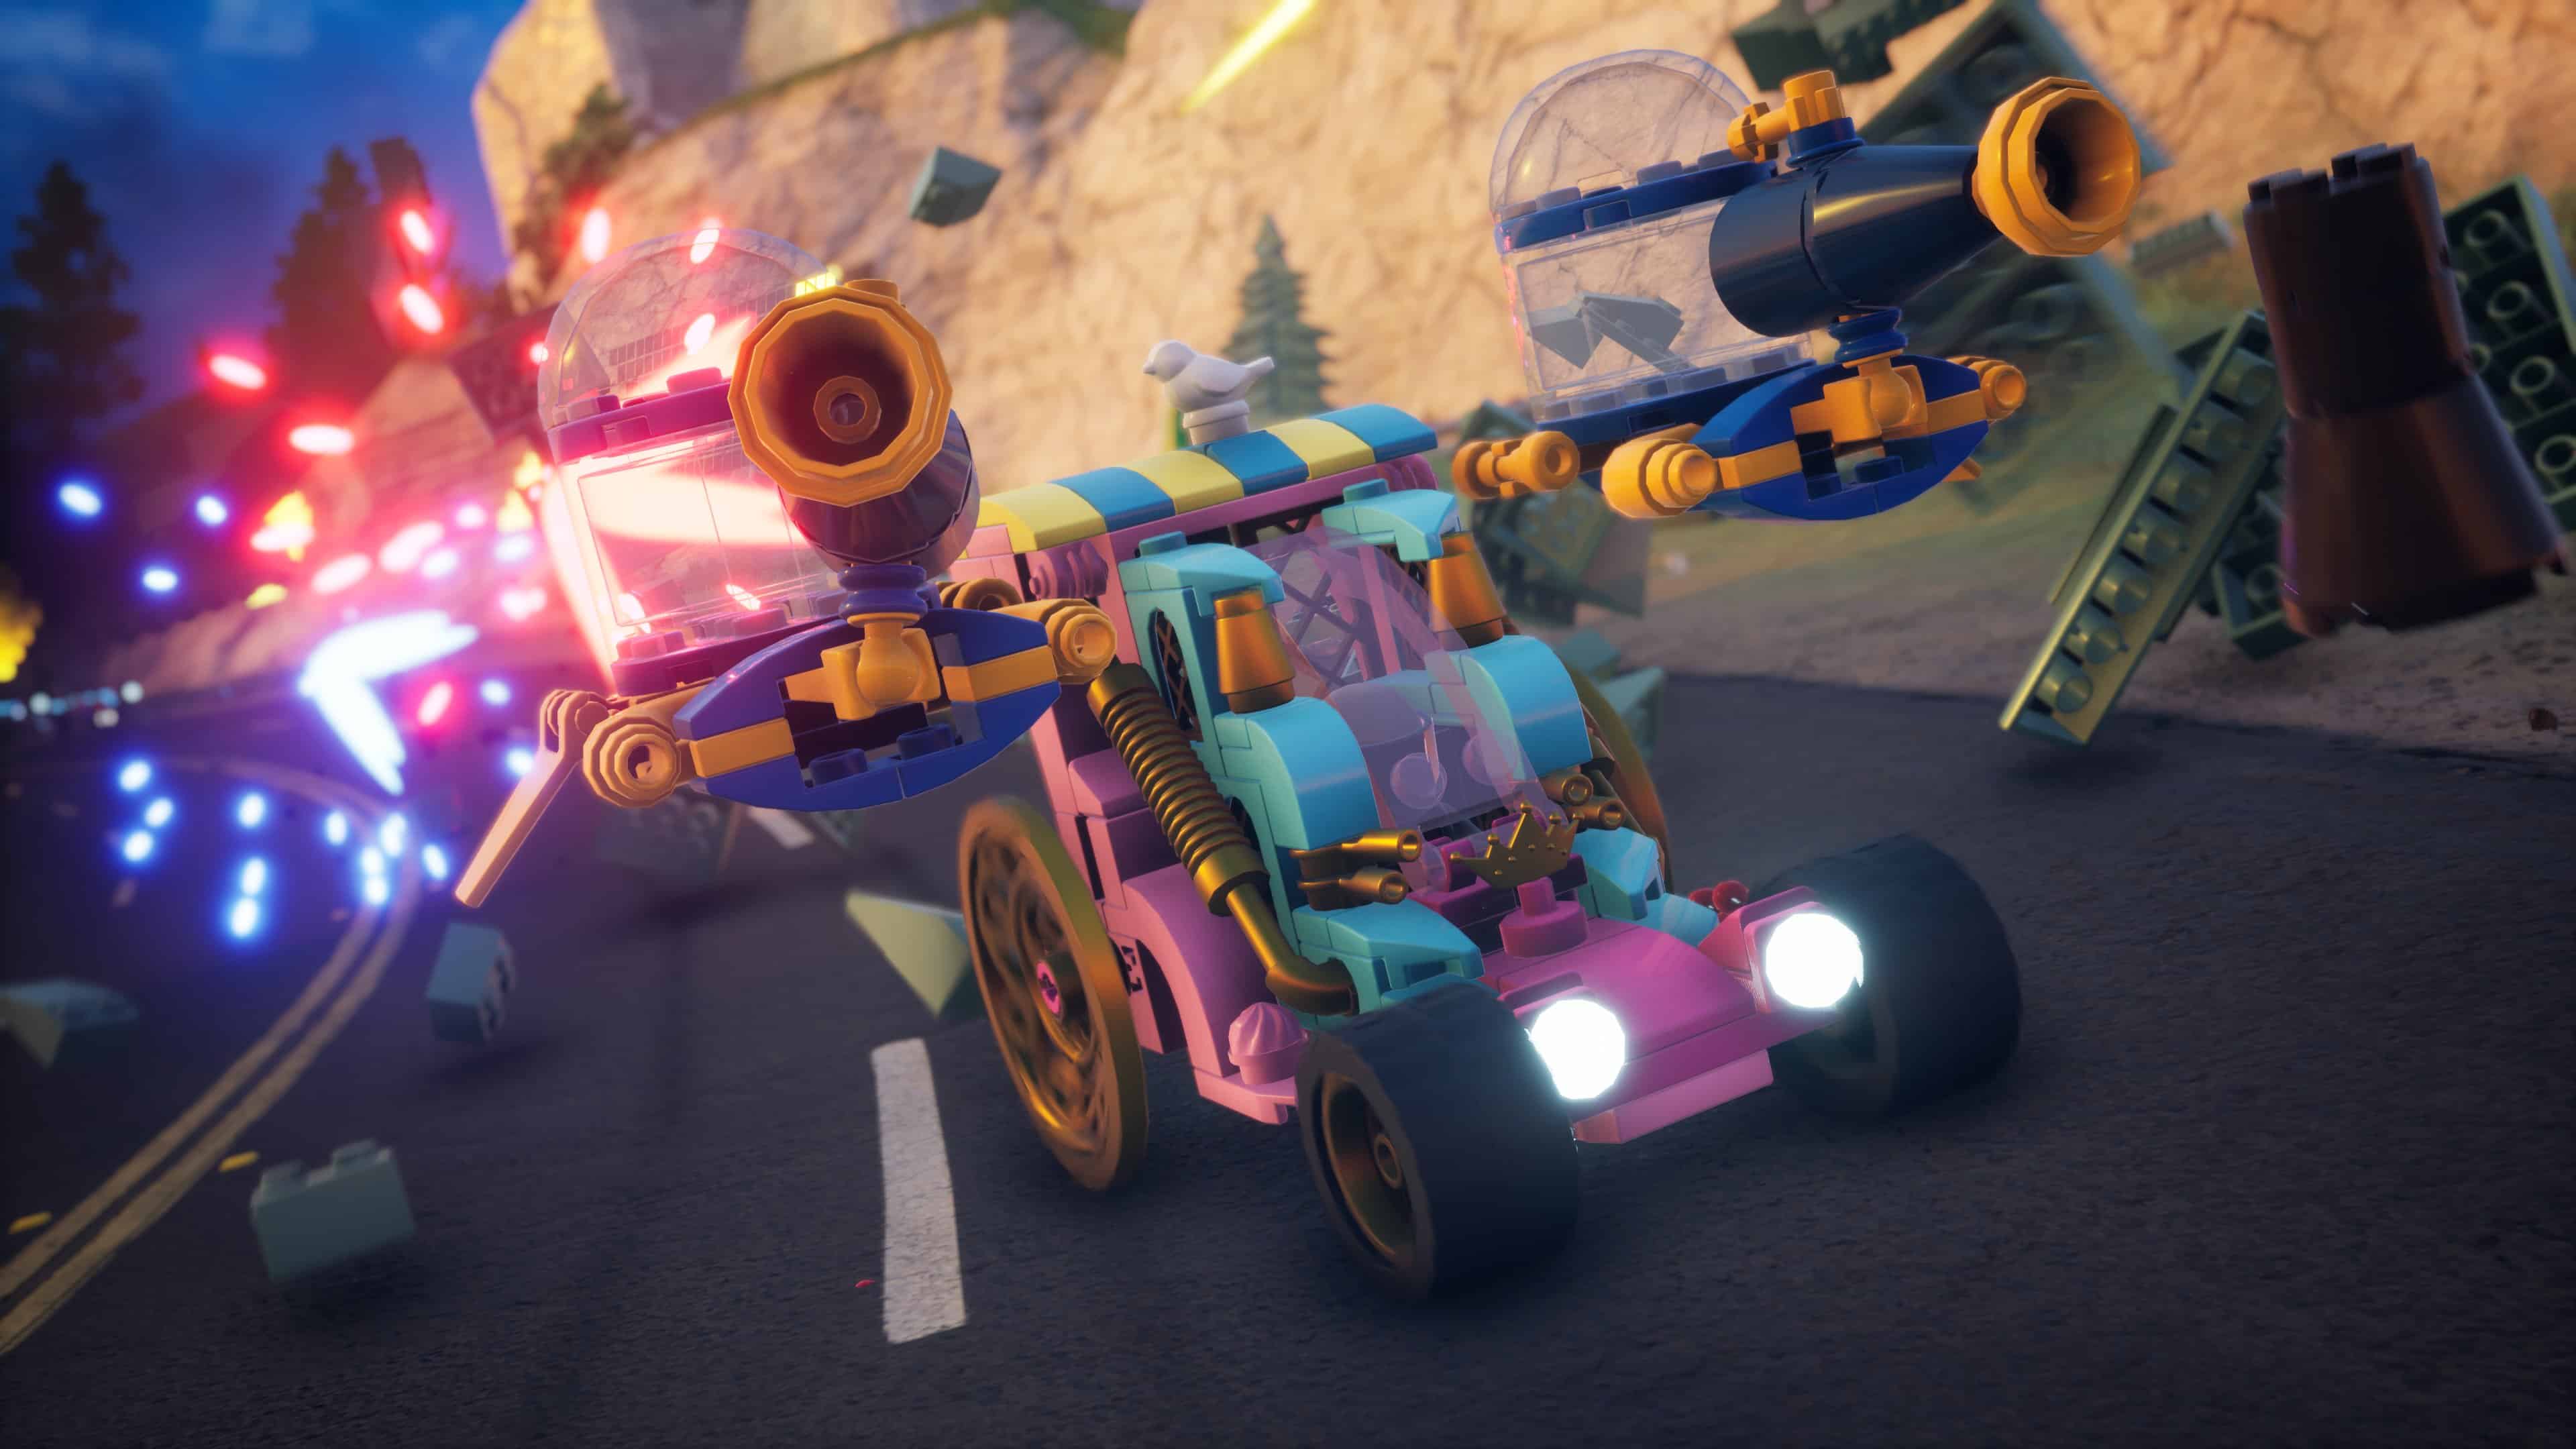 LEGO 2K Drive 1.13 Slides Season for This Out 3 Dec. 13